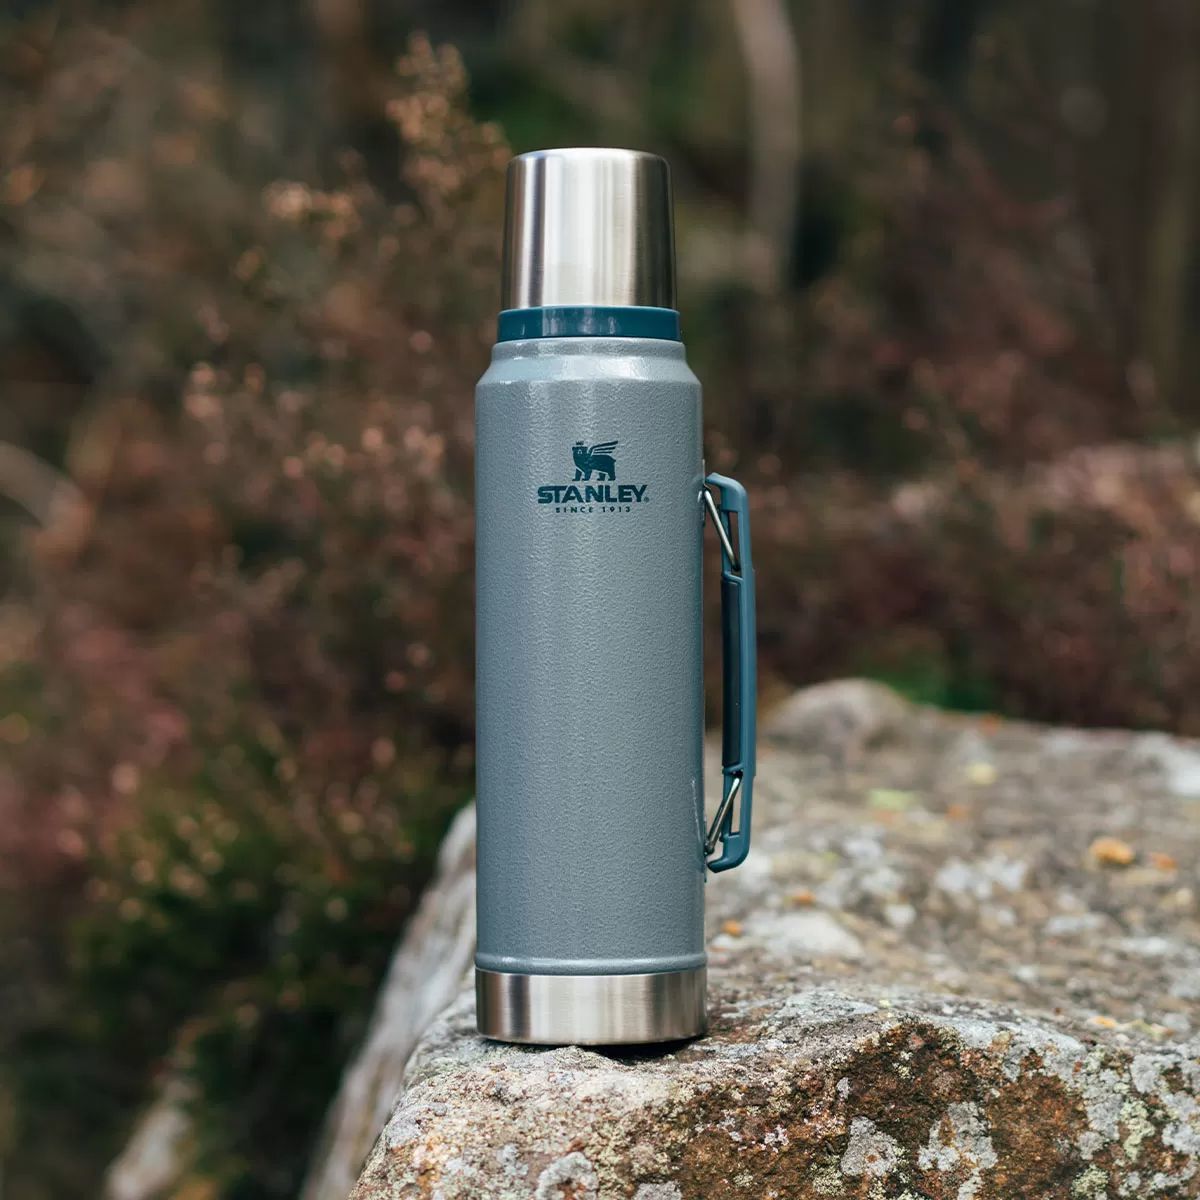 Classic 1 Legendary Stanley Thermos | FormAdore - 10-08266-054 l